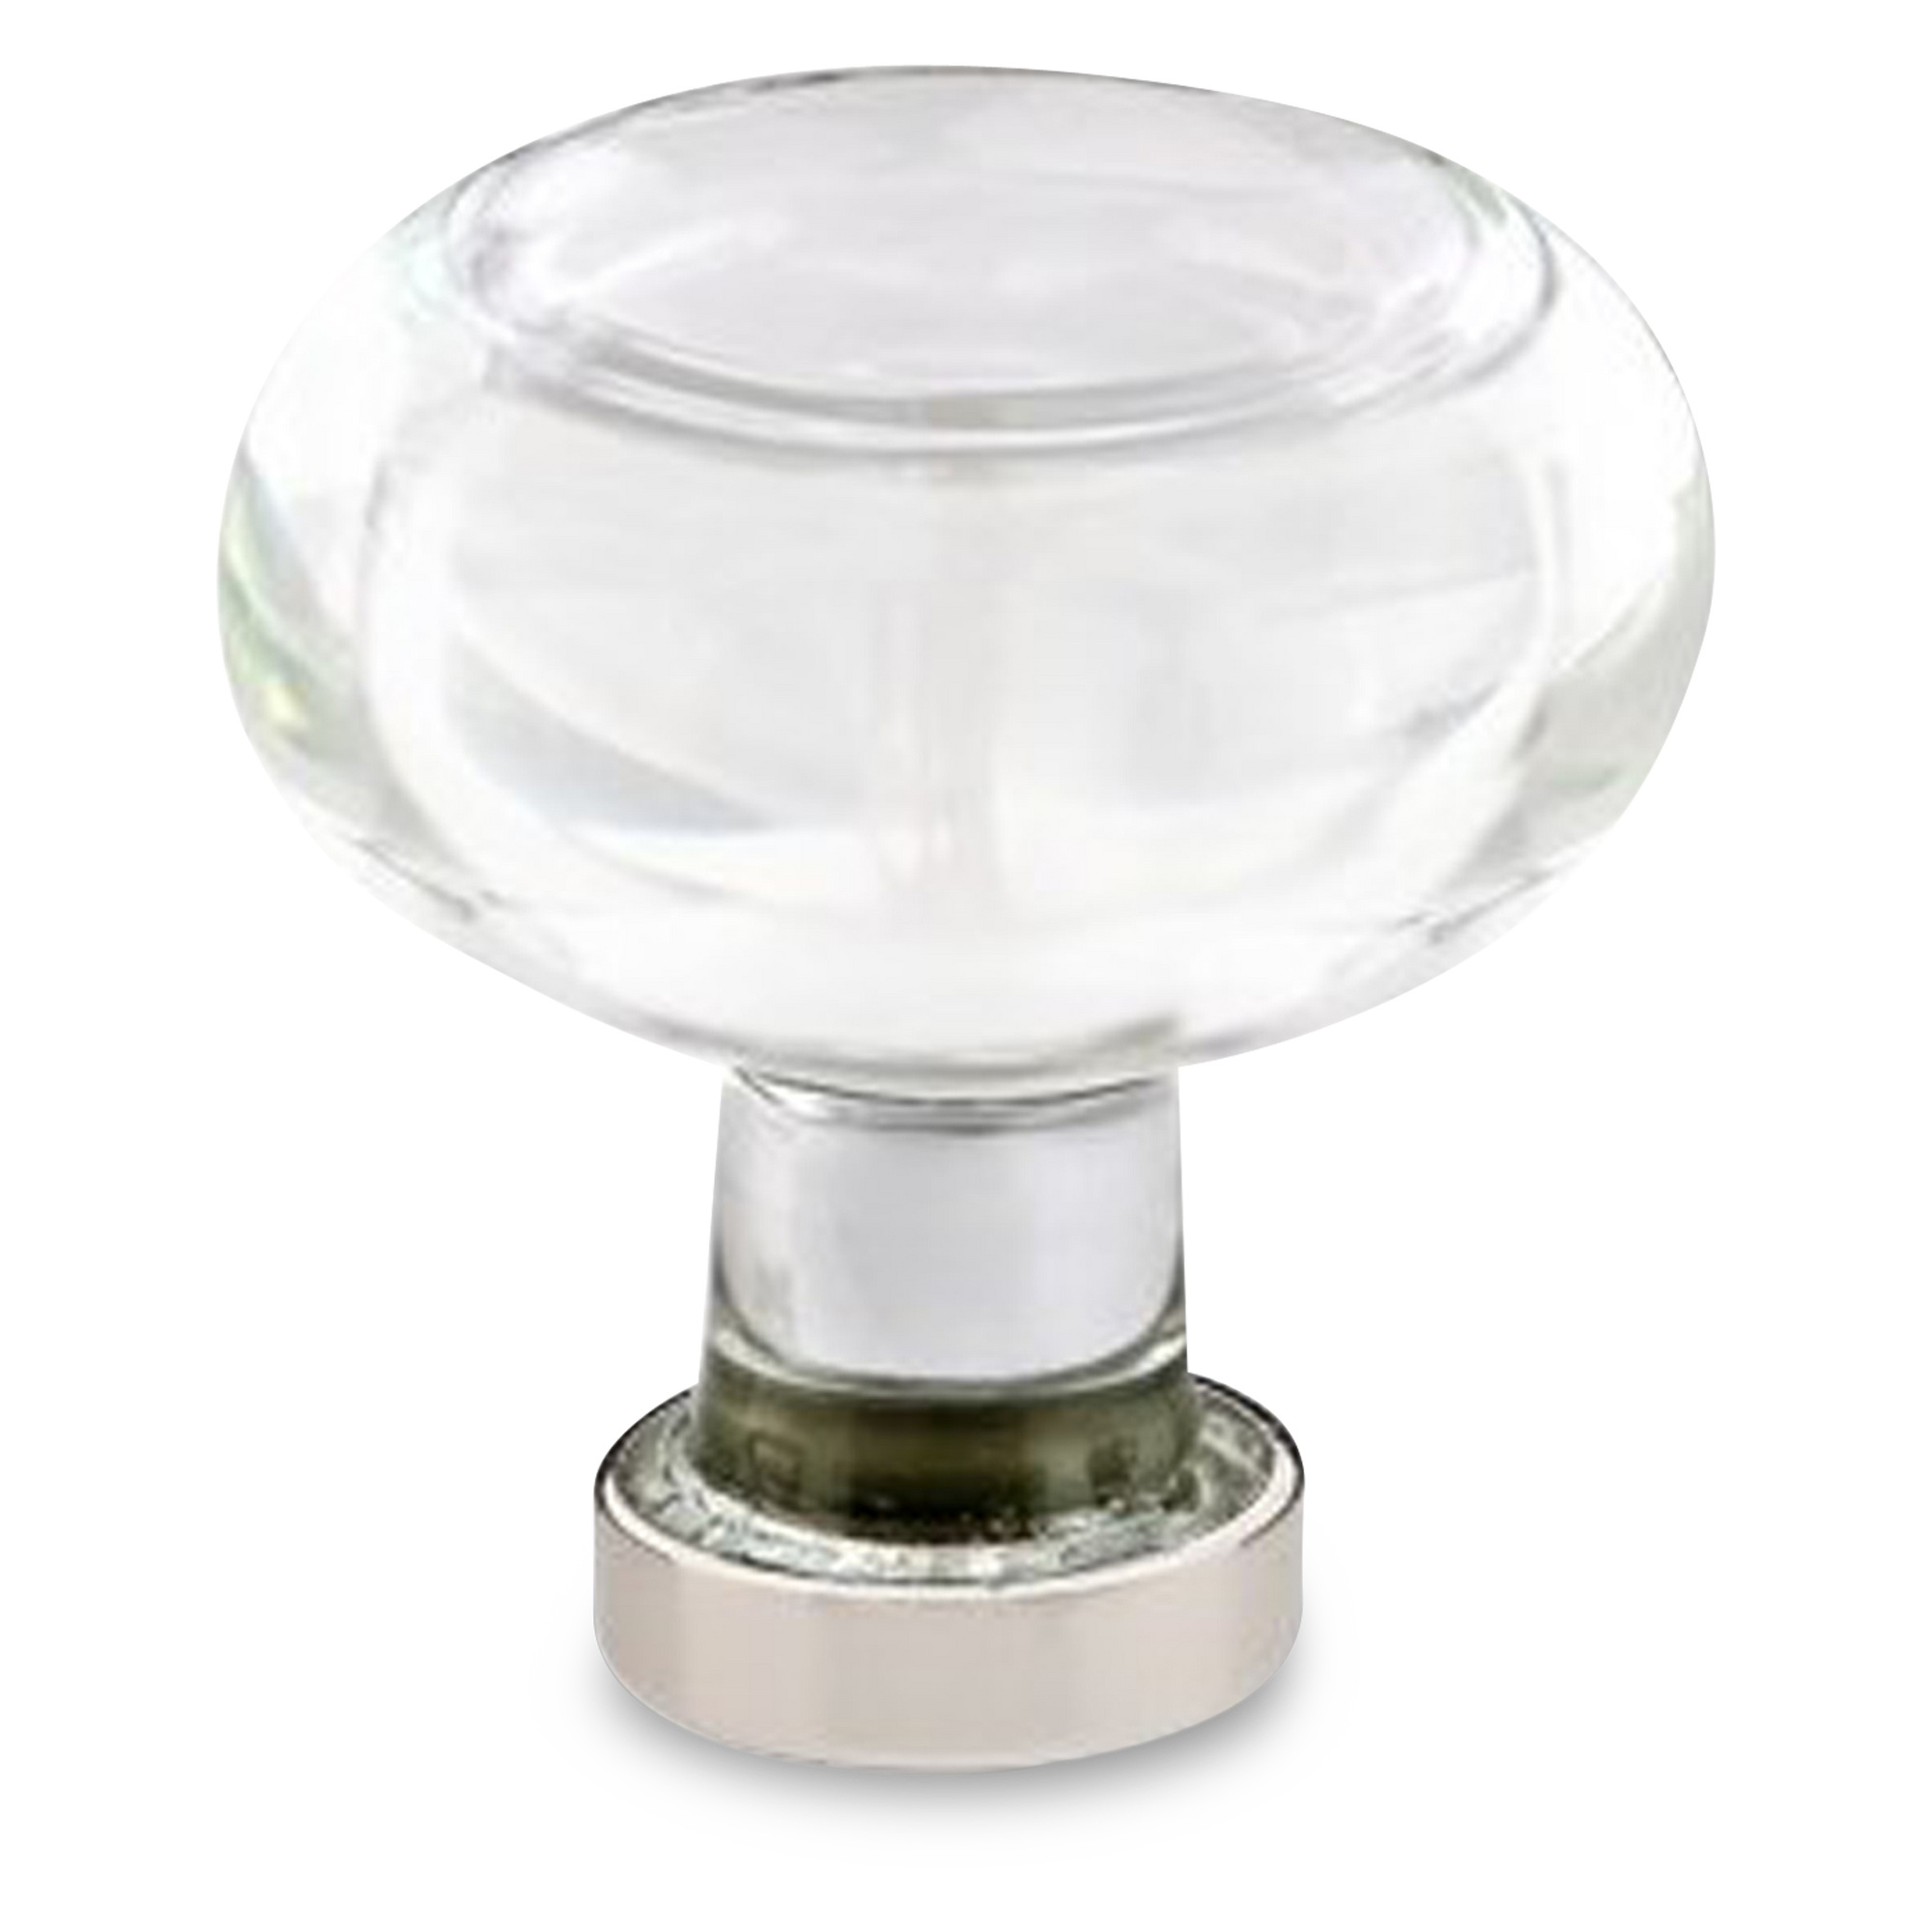 The Georgetown knob features a glamorous glass gem.